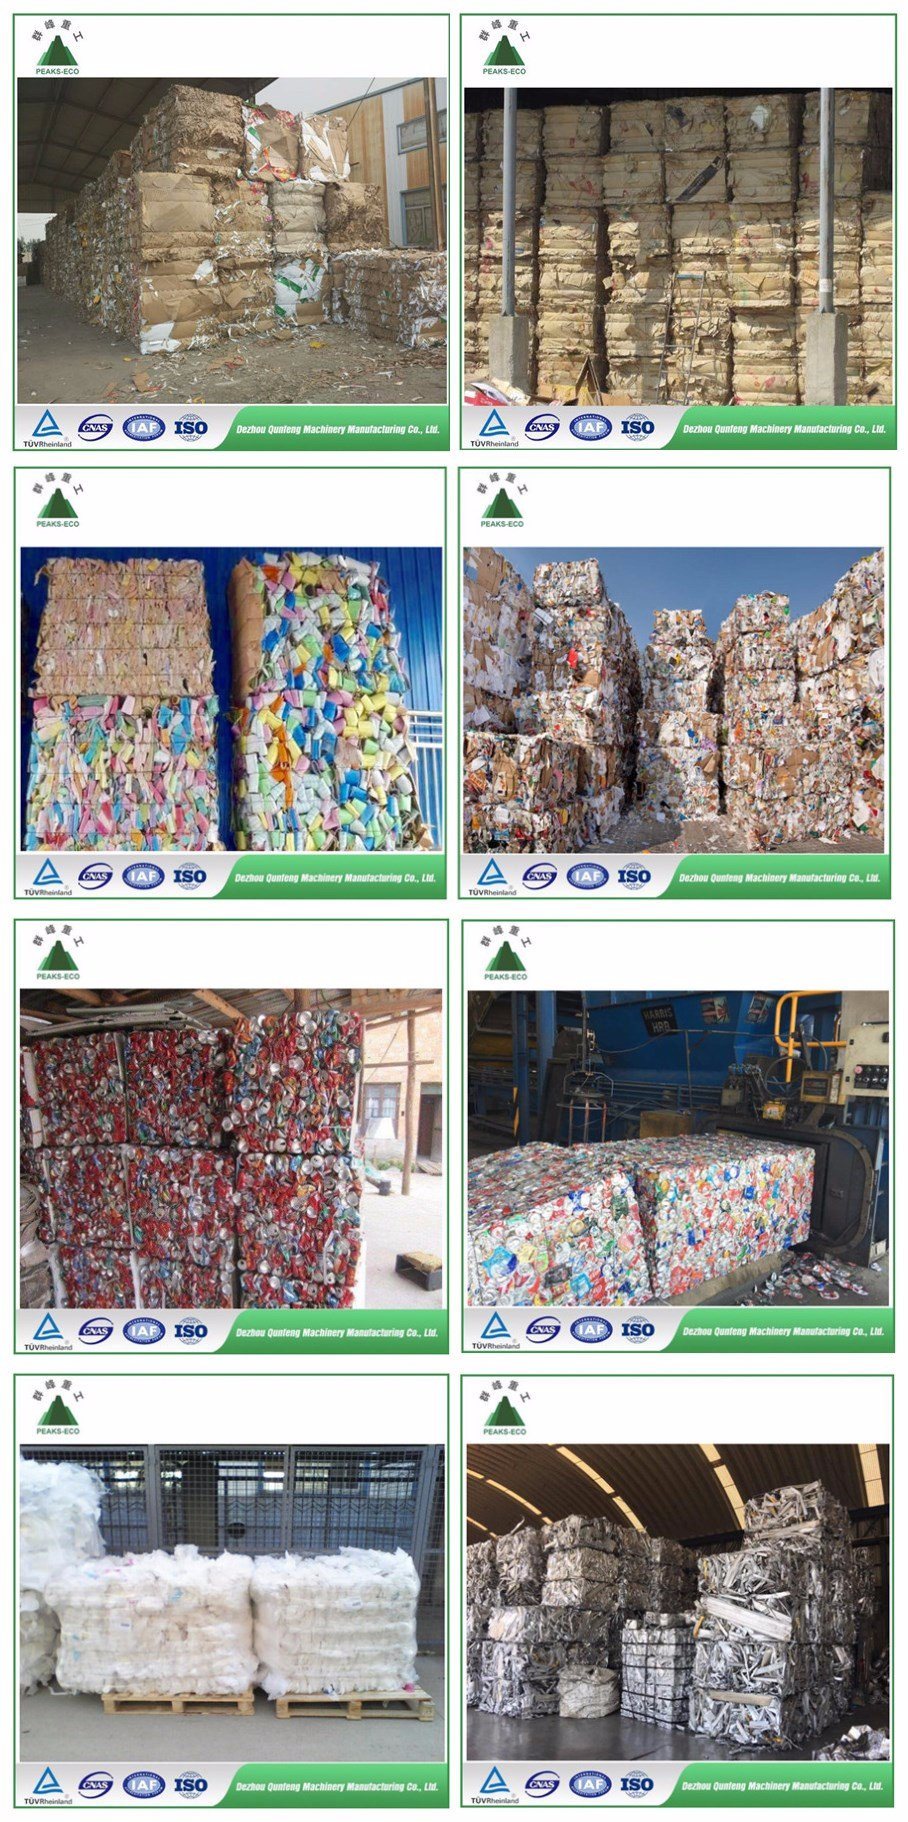 Hydraulic Recycling Waste Paper Baler for Sale/Straw/Plastic/Paper/Cardboard/Occ Press Baler Machine Made in China/Recycling Baler